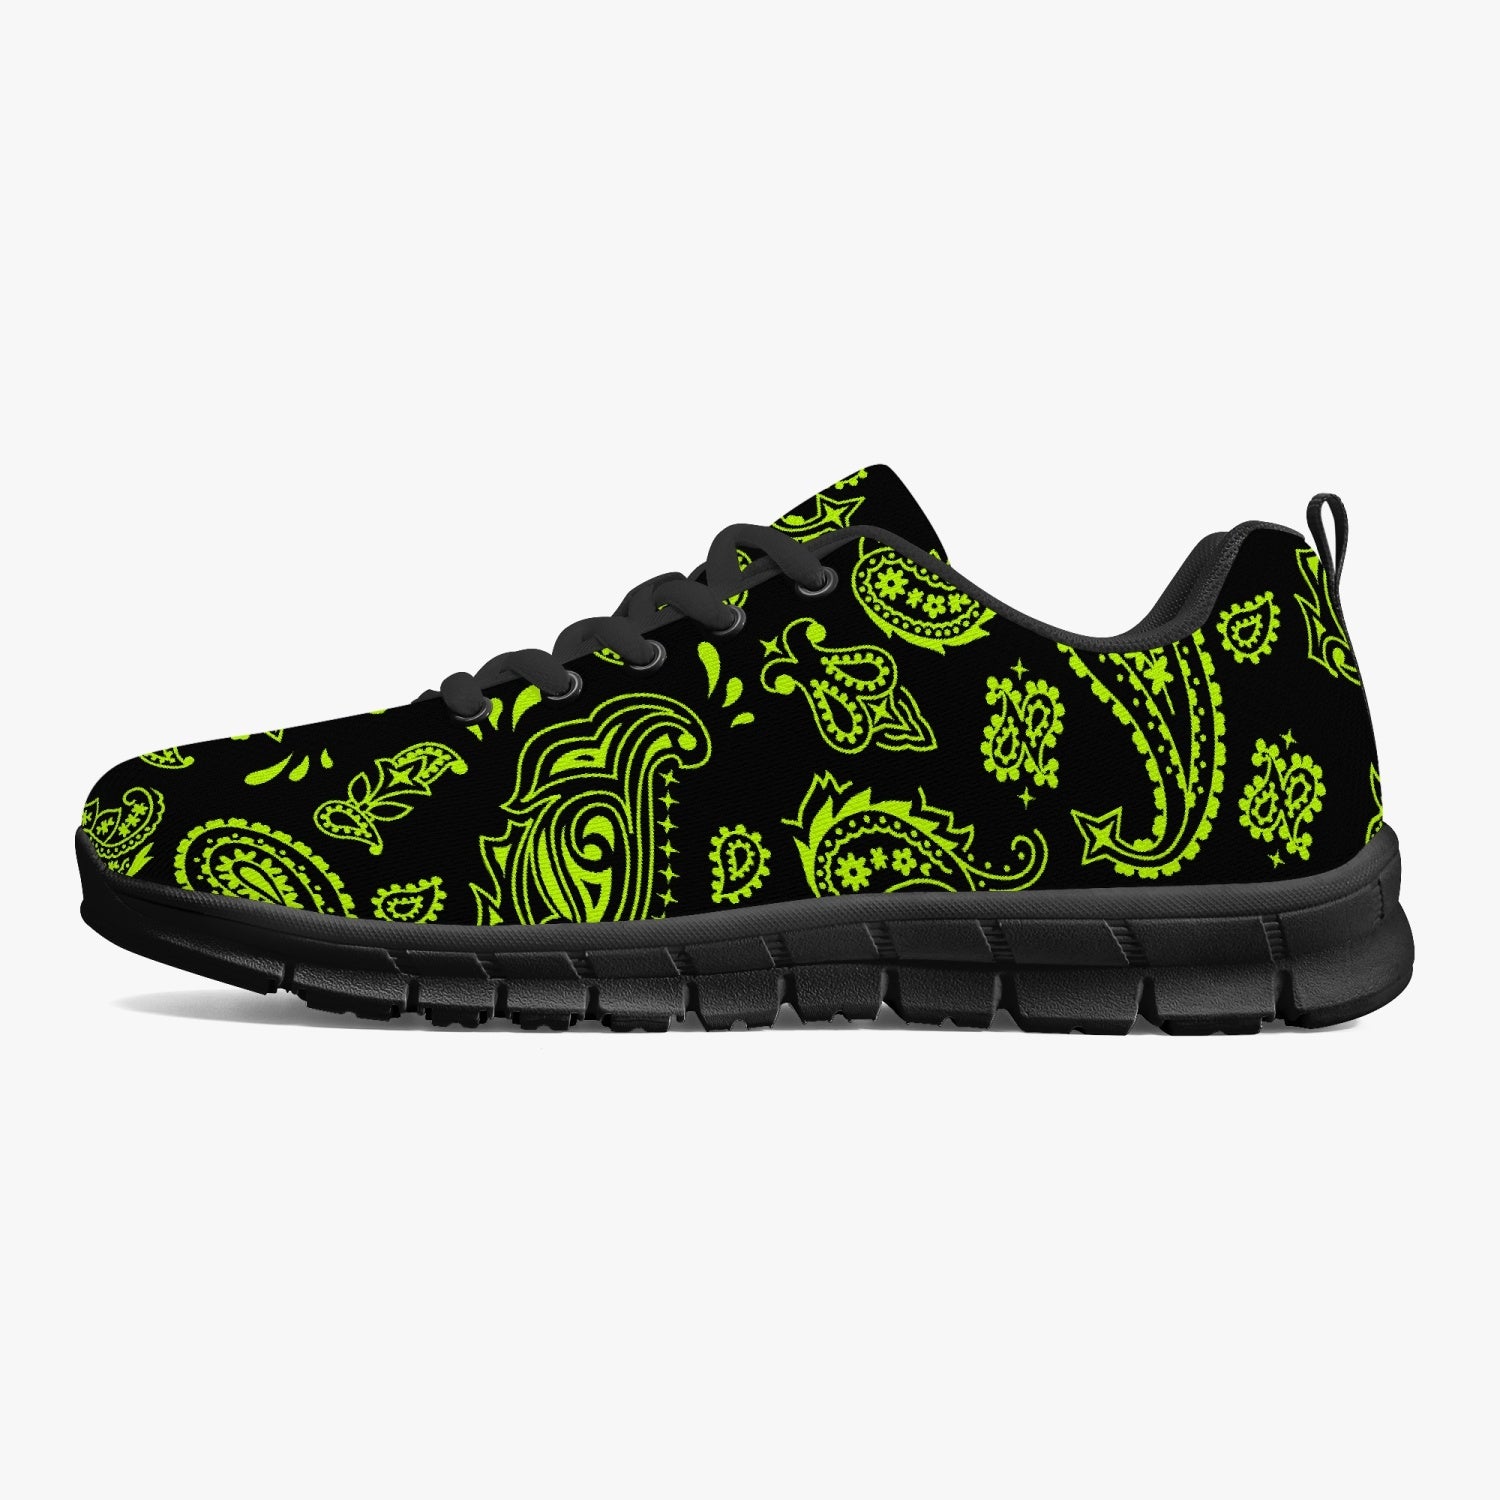 Highlighter Green Paisley Sneakers